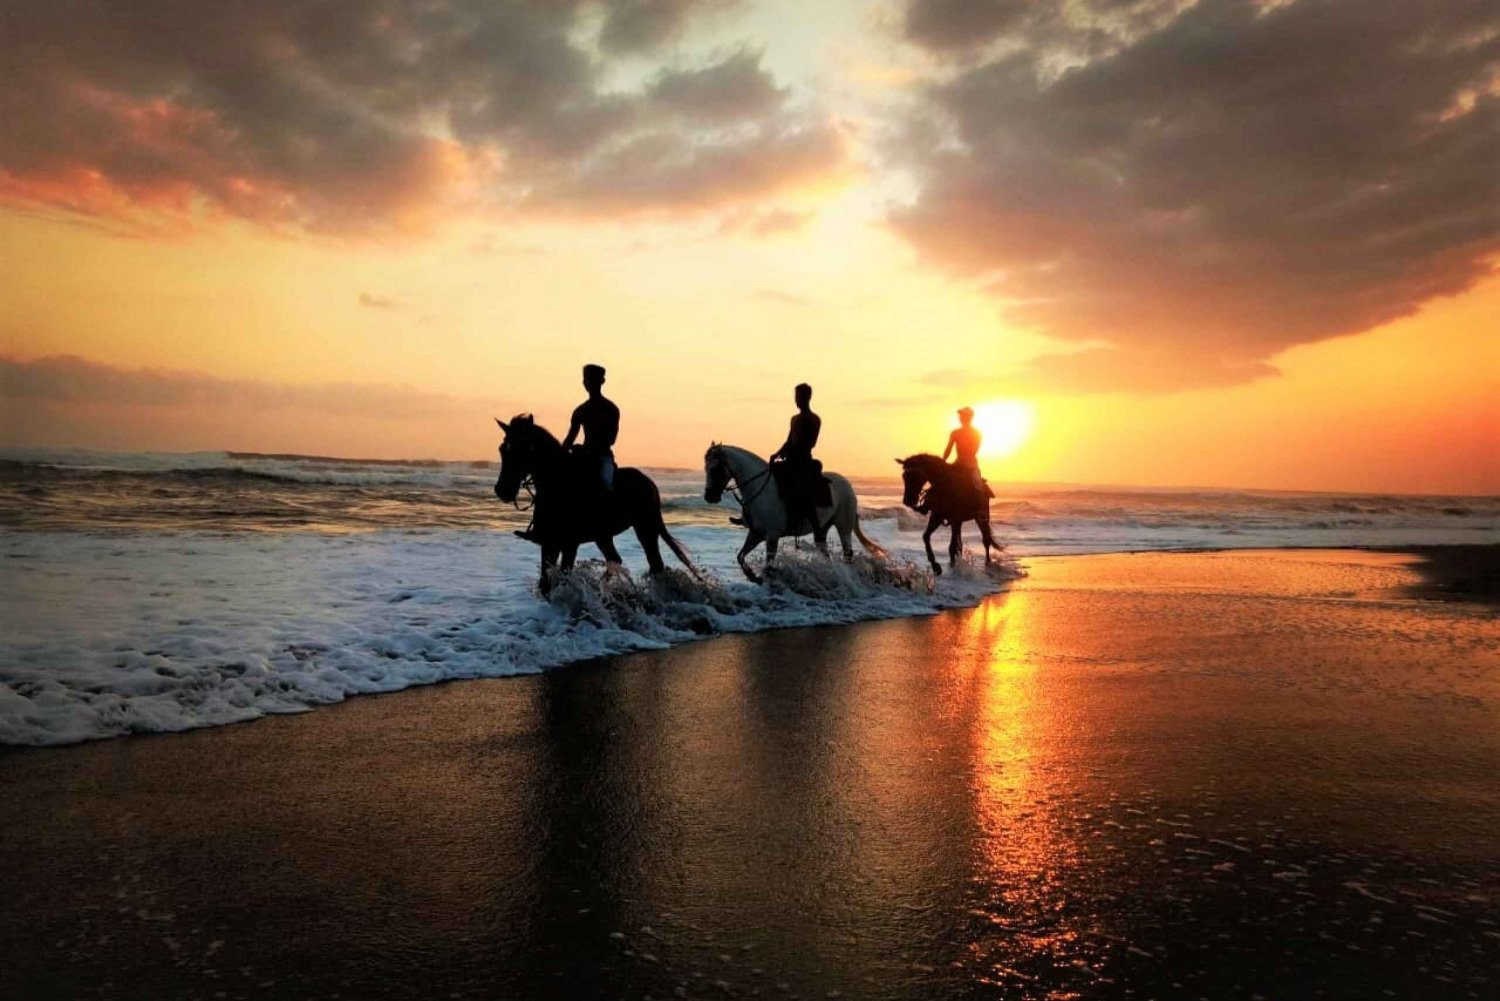 Langudu: Horse Riding on the Beach and in the Rice Fields